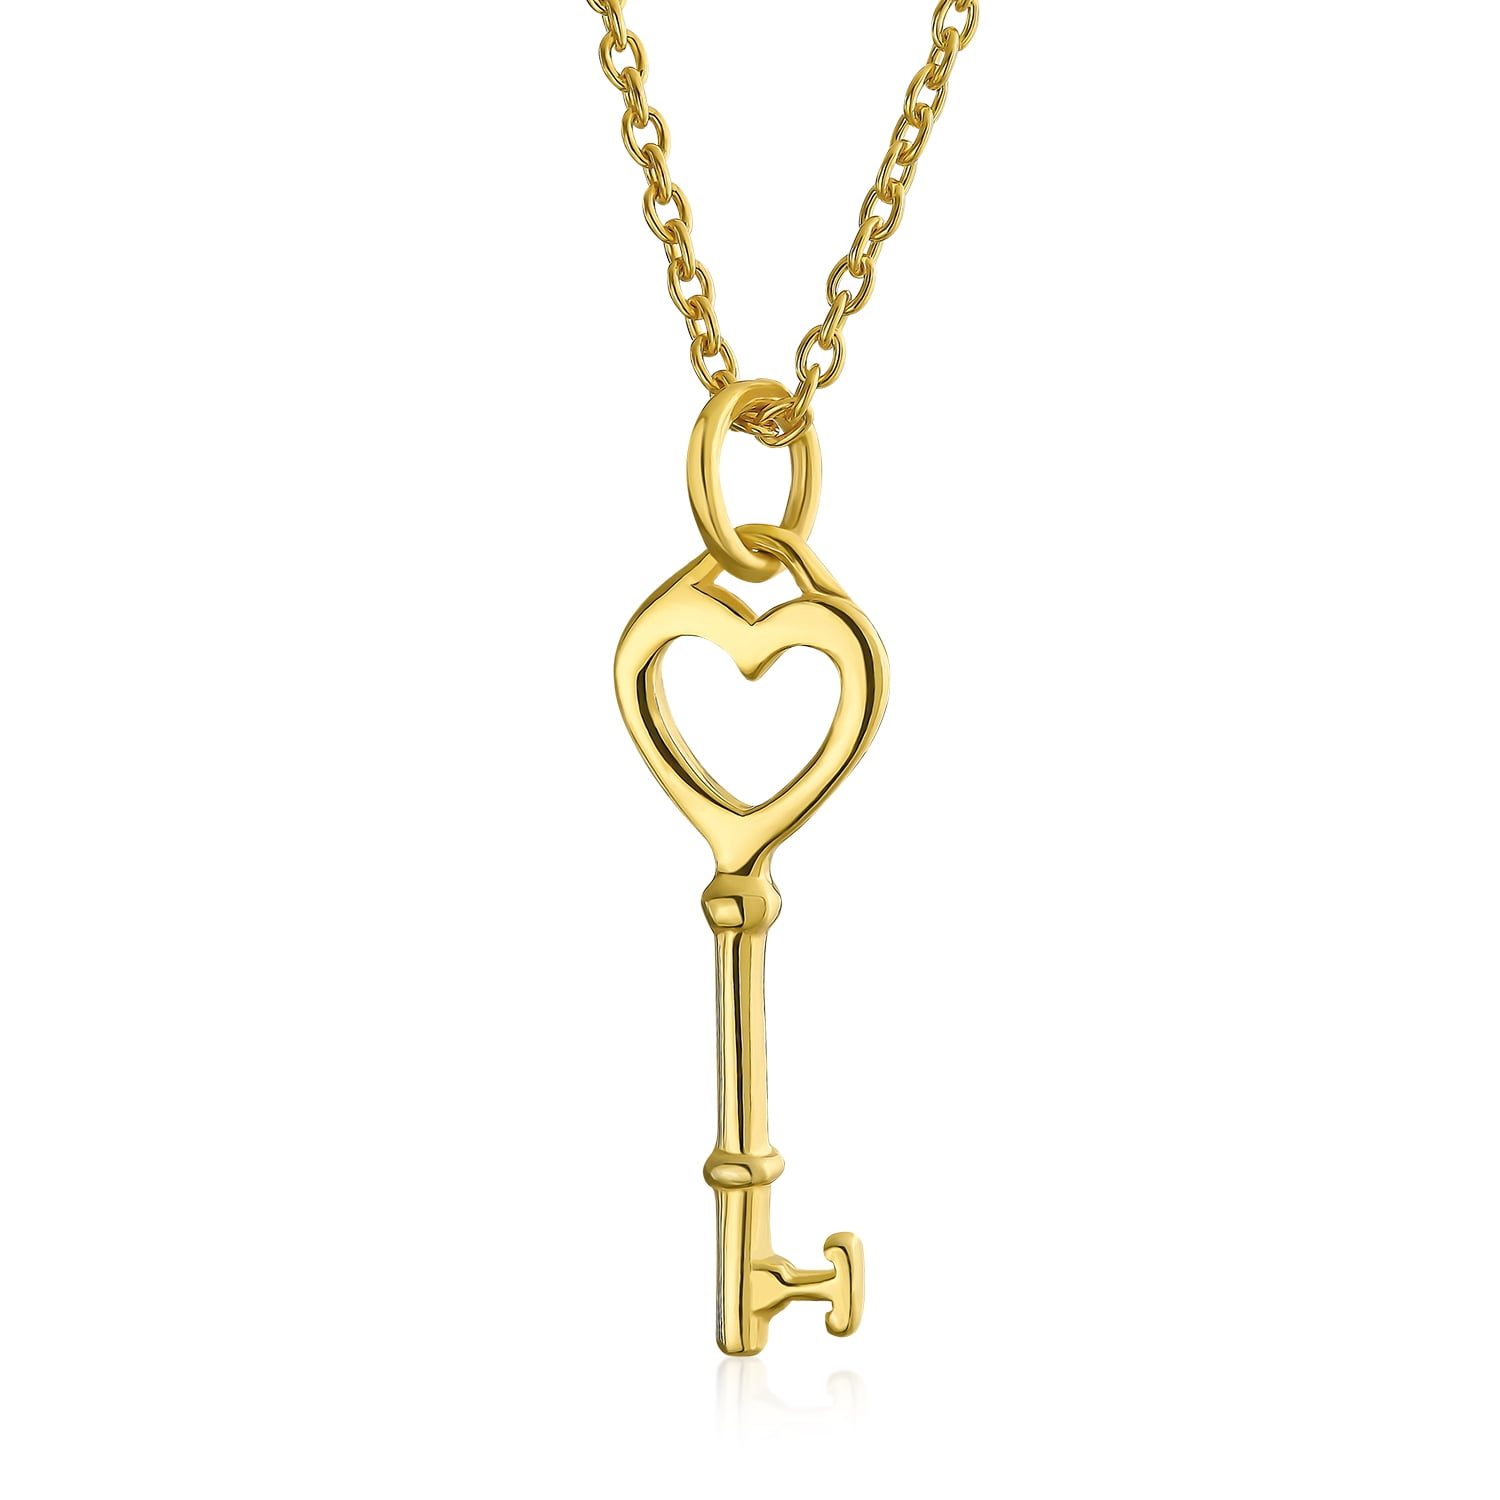 Tiny Gold Classic Key Necklace, Gold Plated Sterling Silver Key Necklace, Key Necklace, Layering Necklace Hand Made